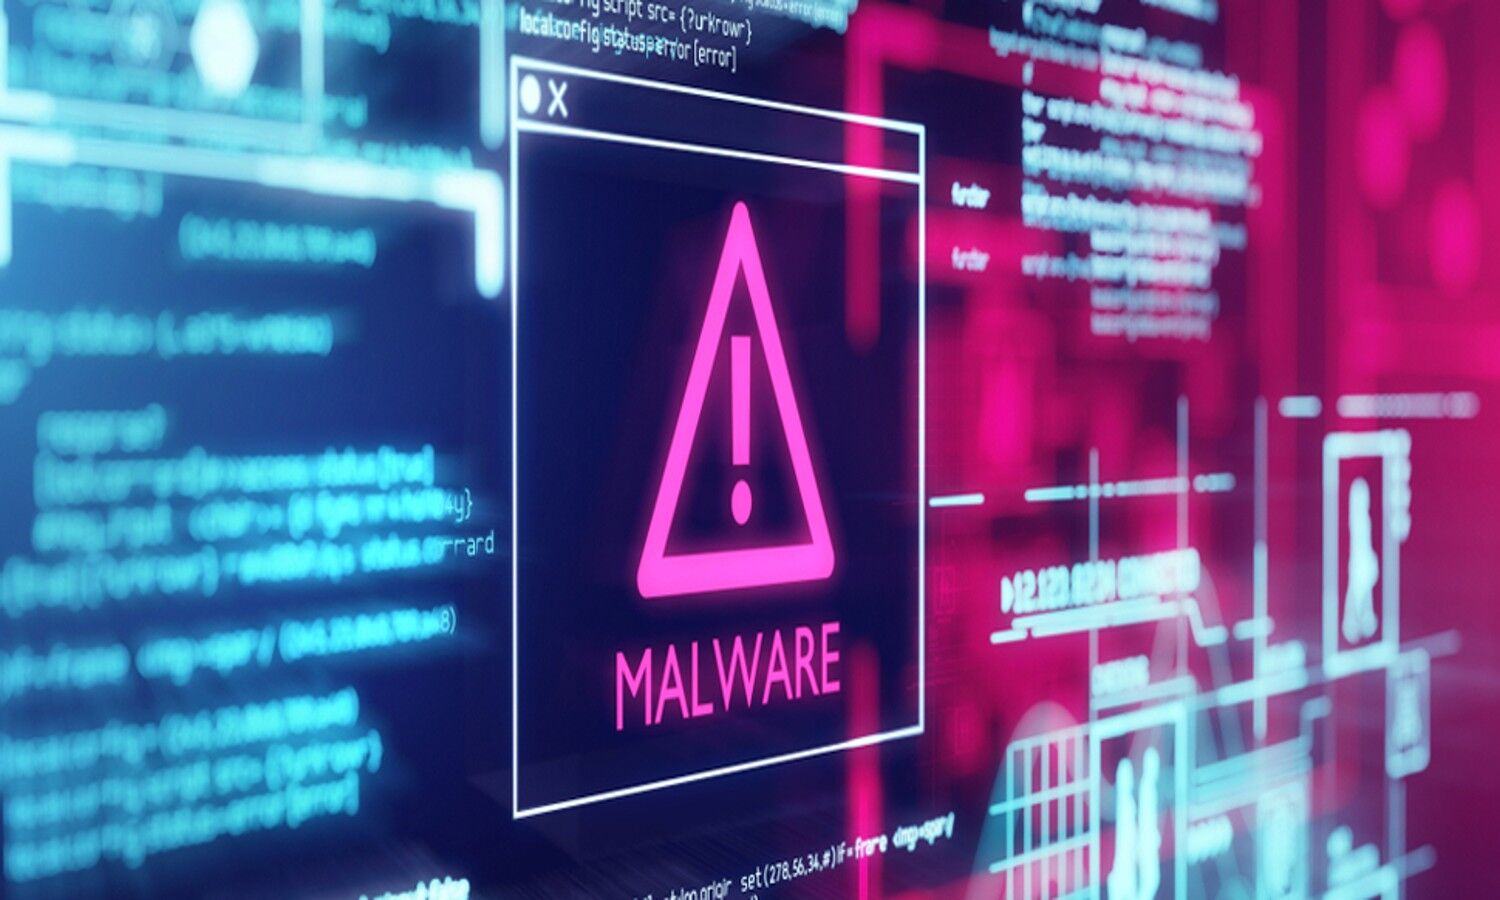 Android Phone Alert: Malware is hidden somewhere in your phone, be alert